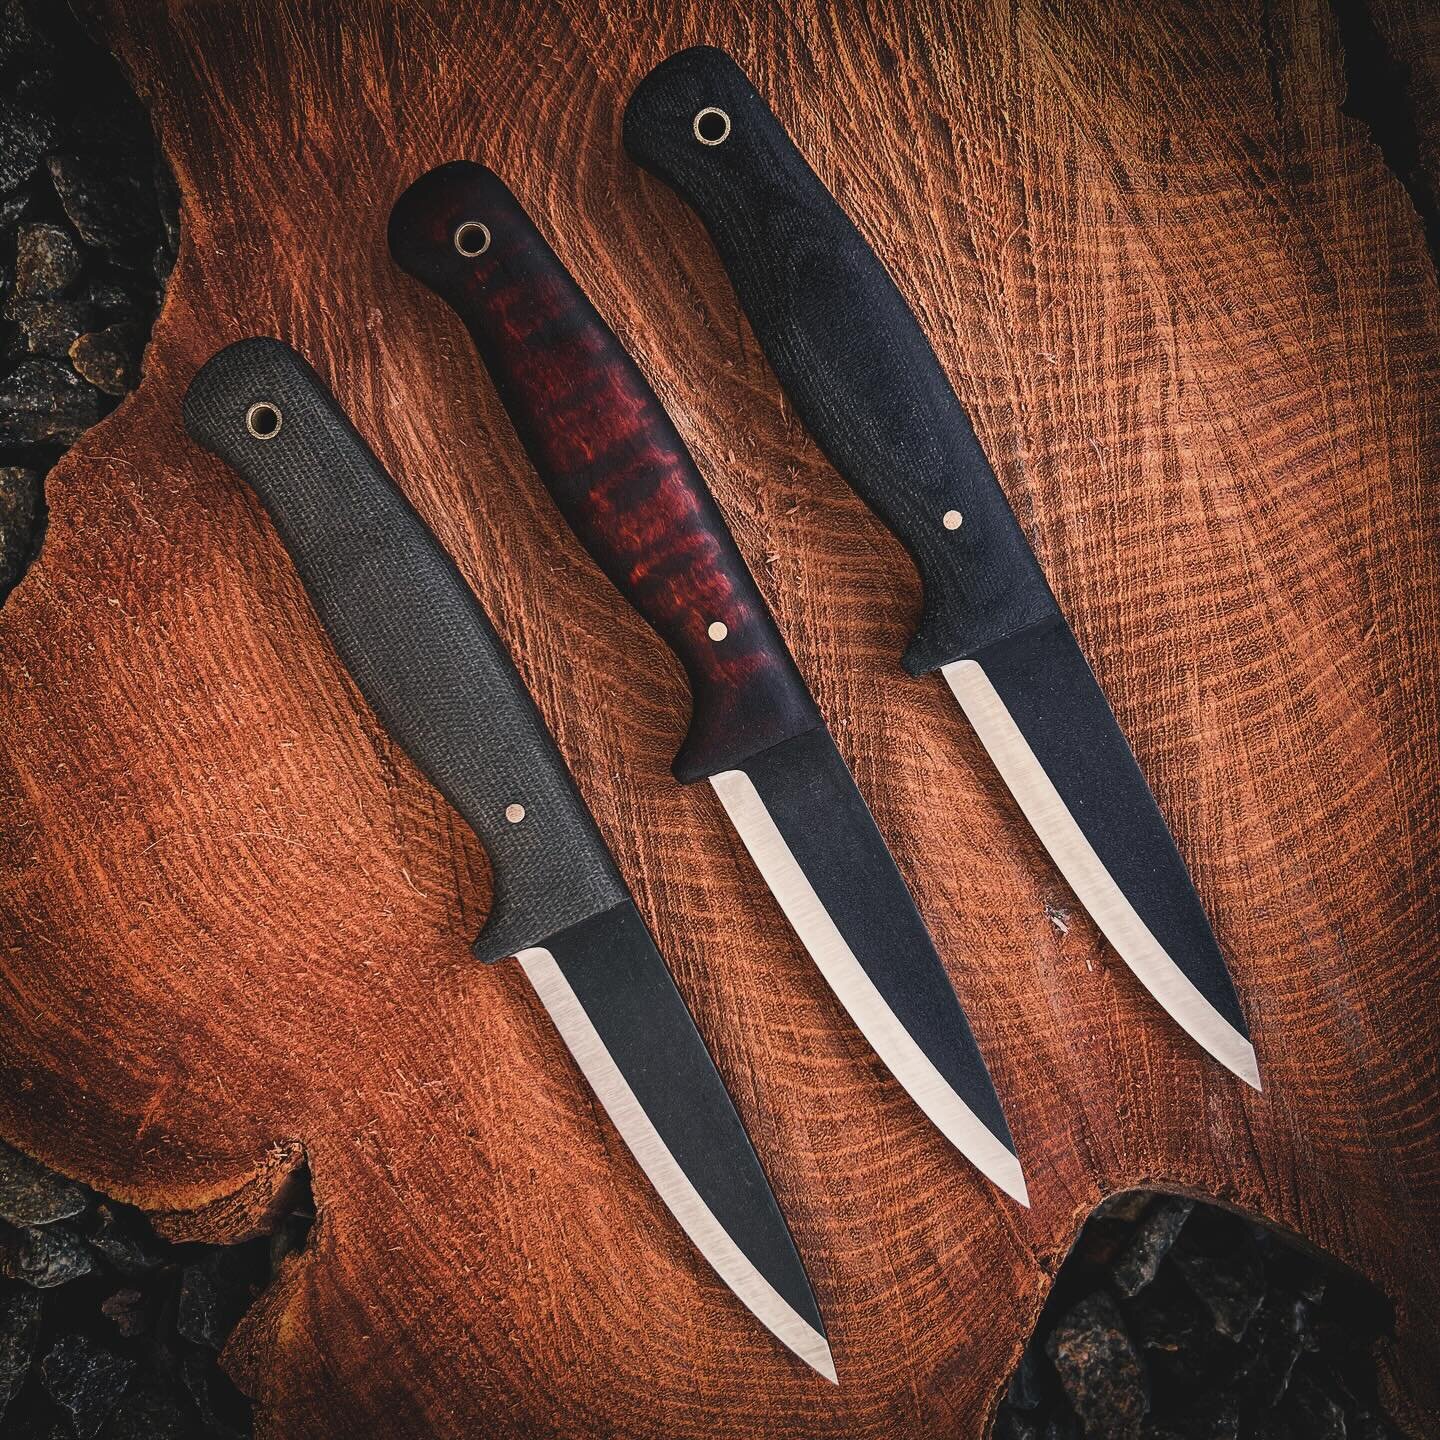 Different knives for different applications. This post features the Bush Lite, Carolina Reaper, Buffalo Cove Bushcrafter and Pocket Tanto. You can check out the finer details on these blades at the link in my bio.
-
I hope y&rsquo;all are having a gr